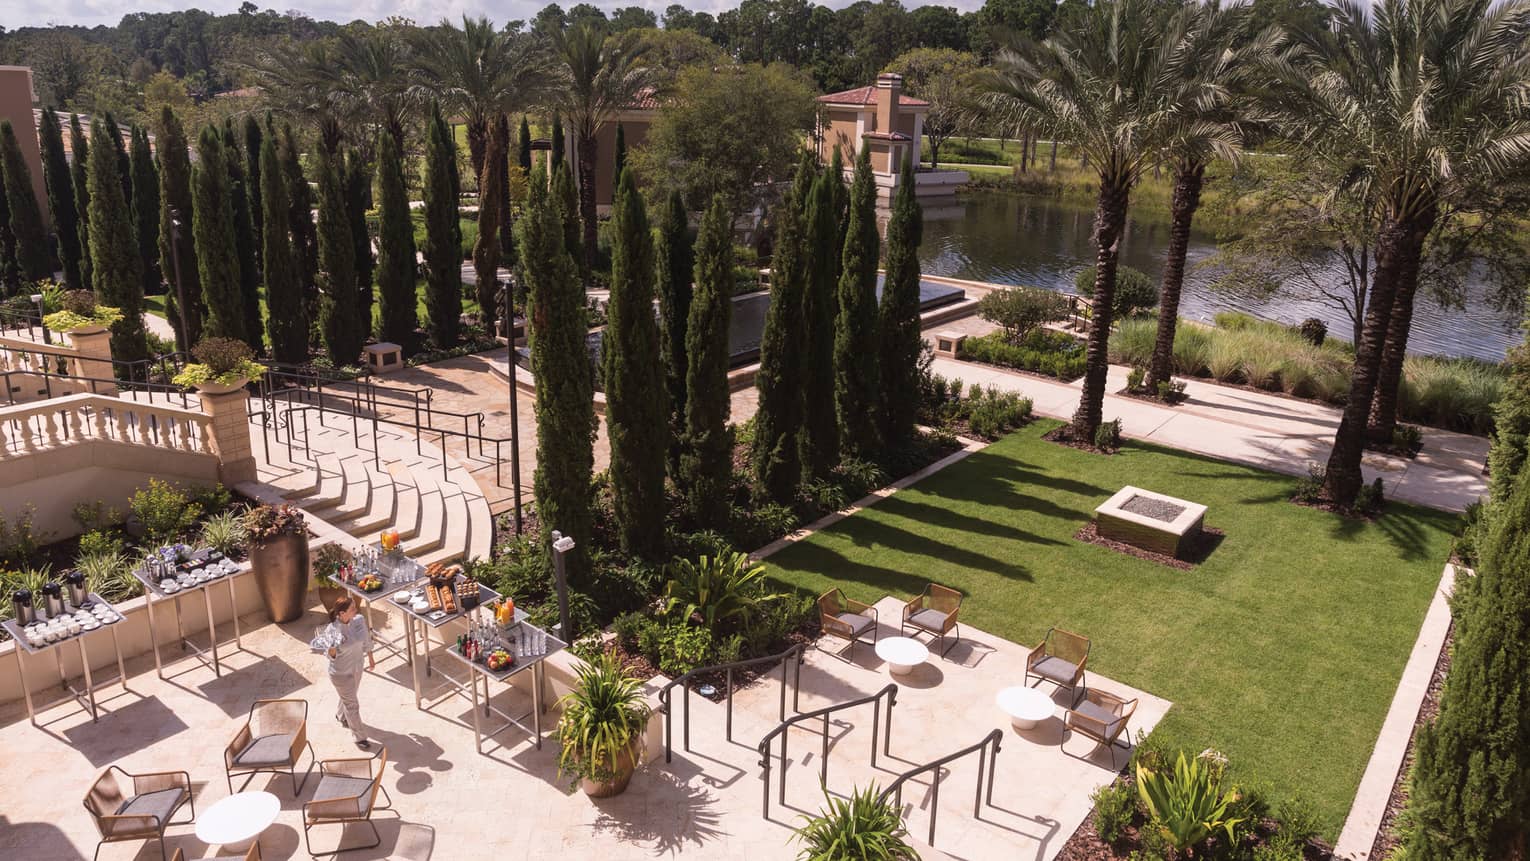 Aerial view of Sabal Terrace event space with dining patio, green lawn and rows of trees